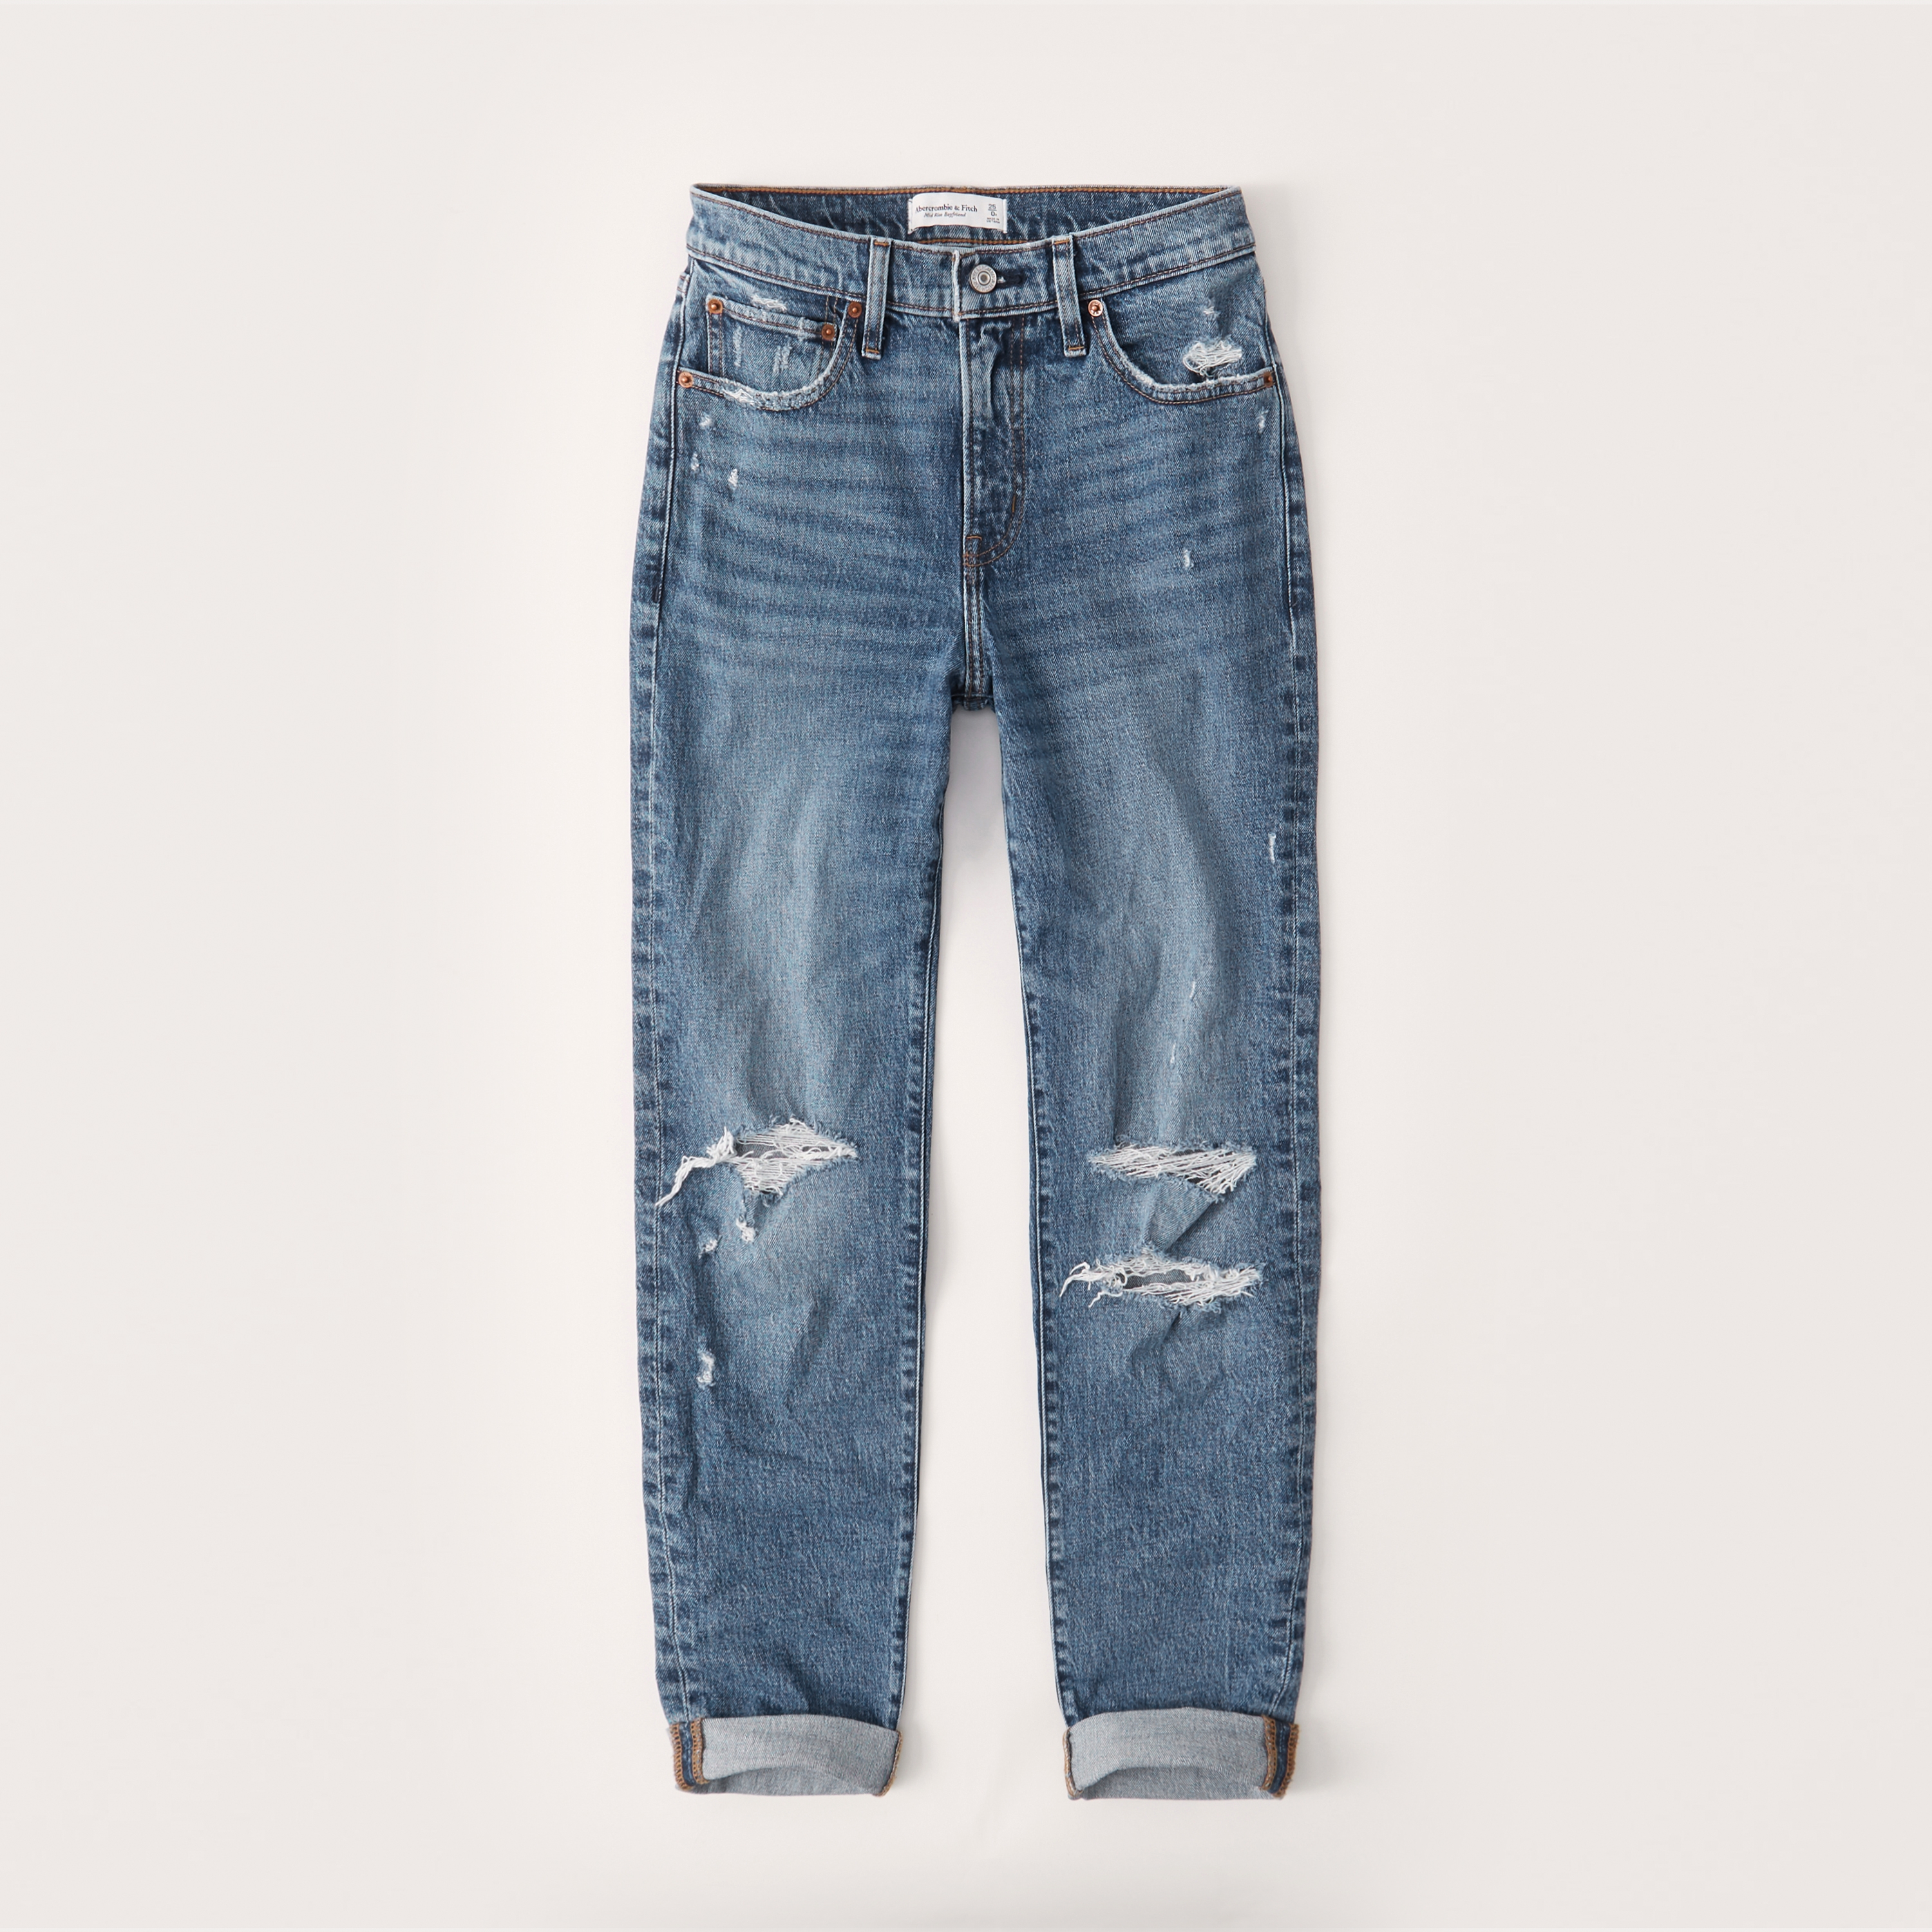 a&f low rise jeans